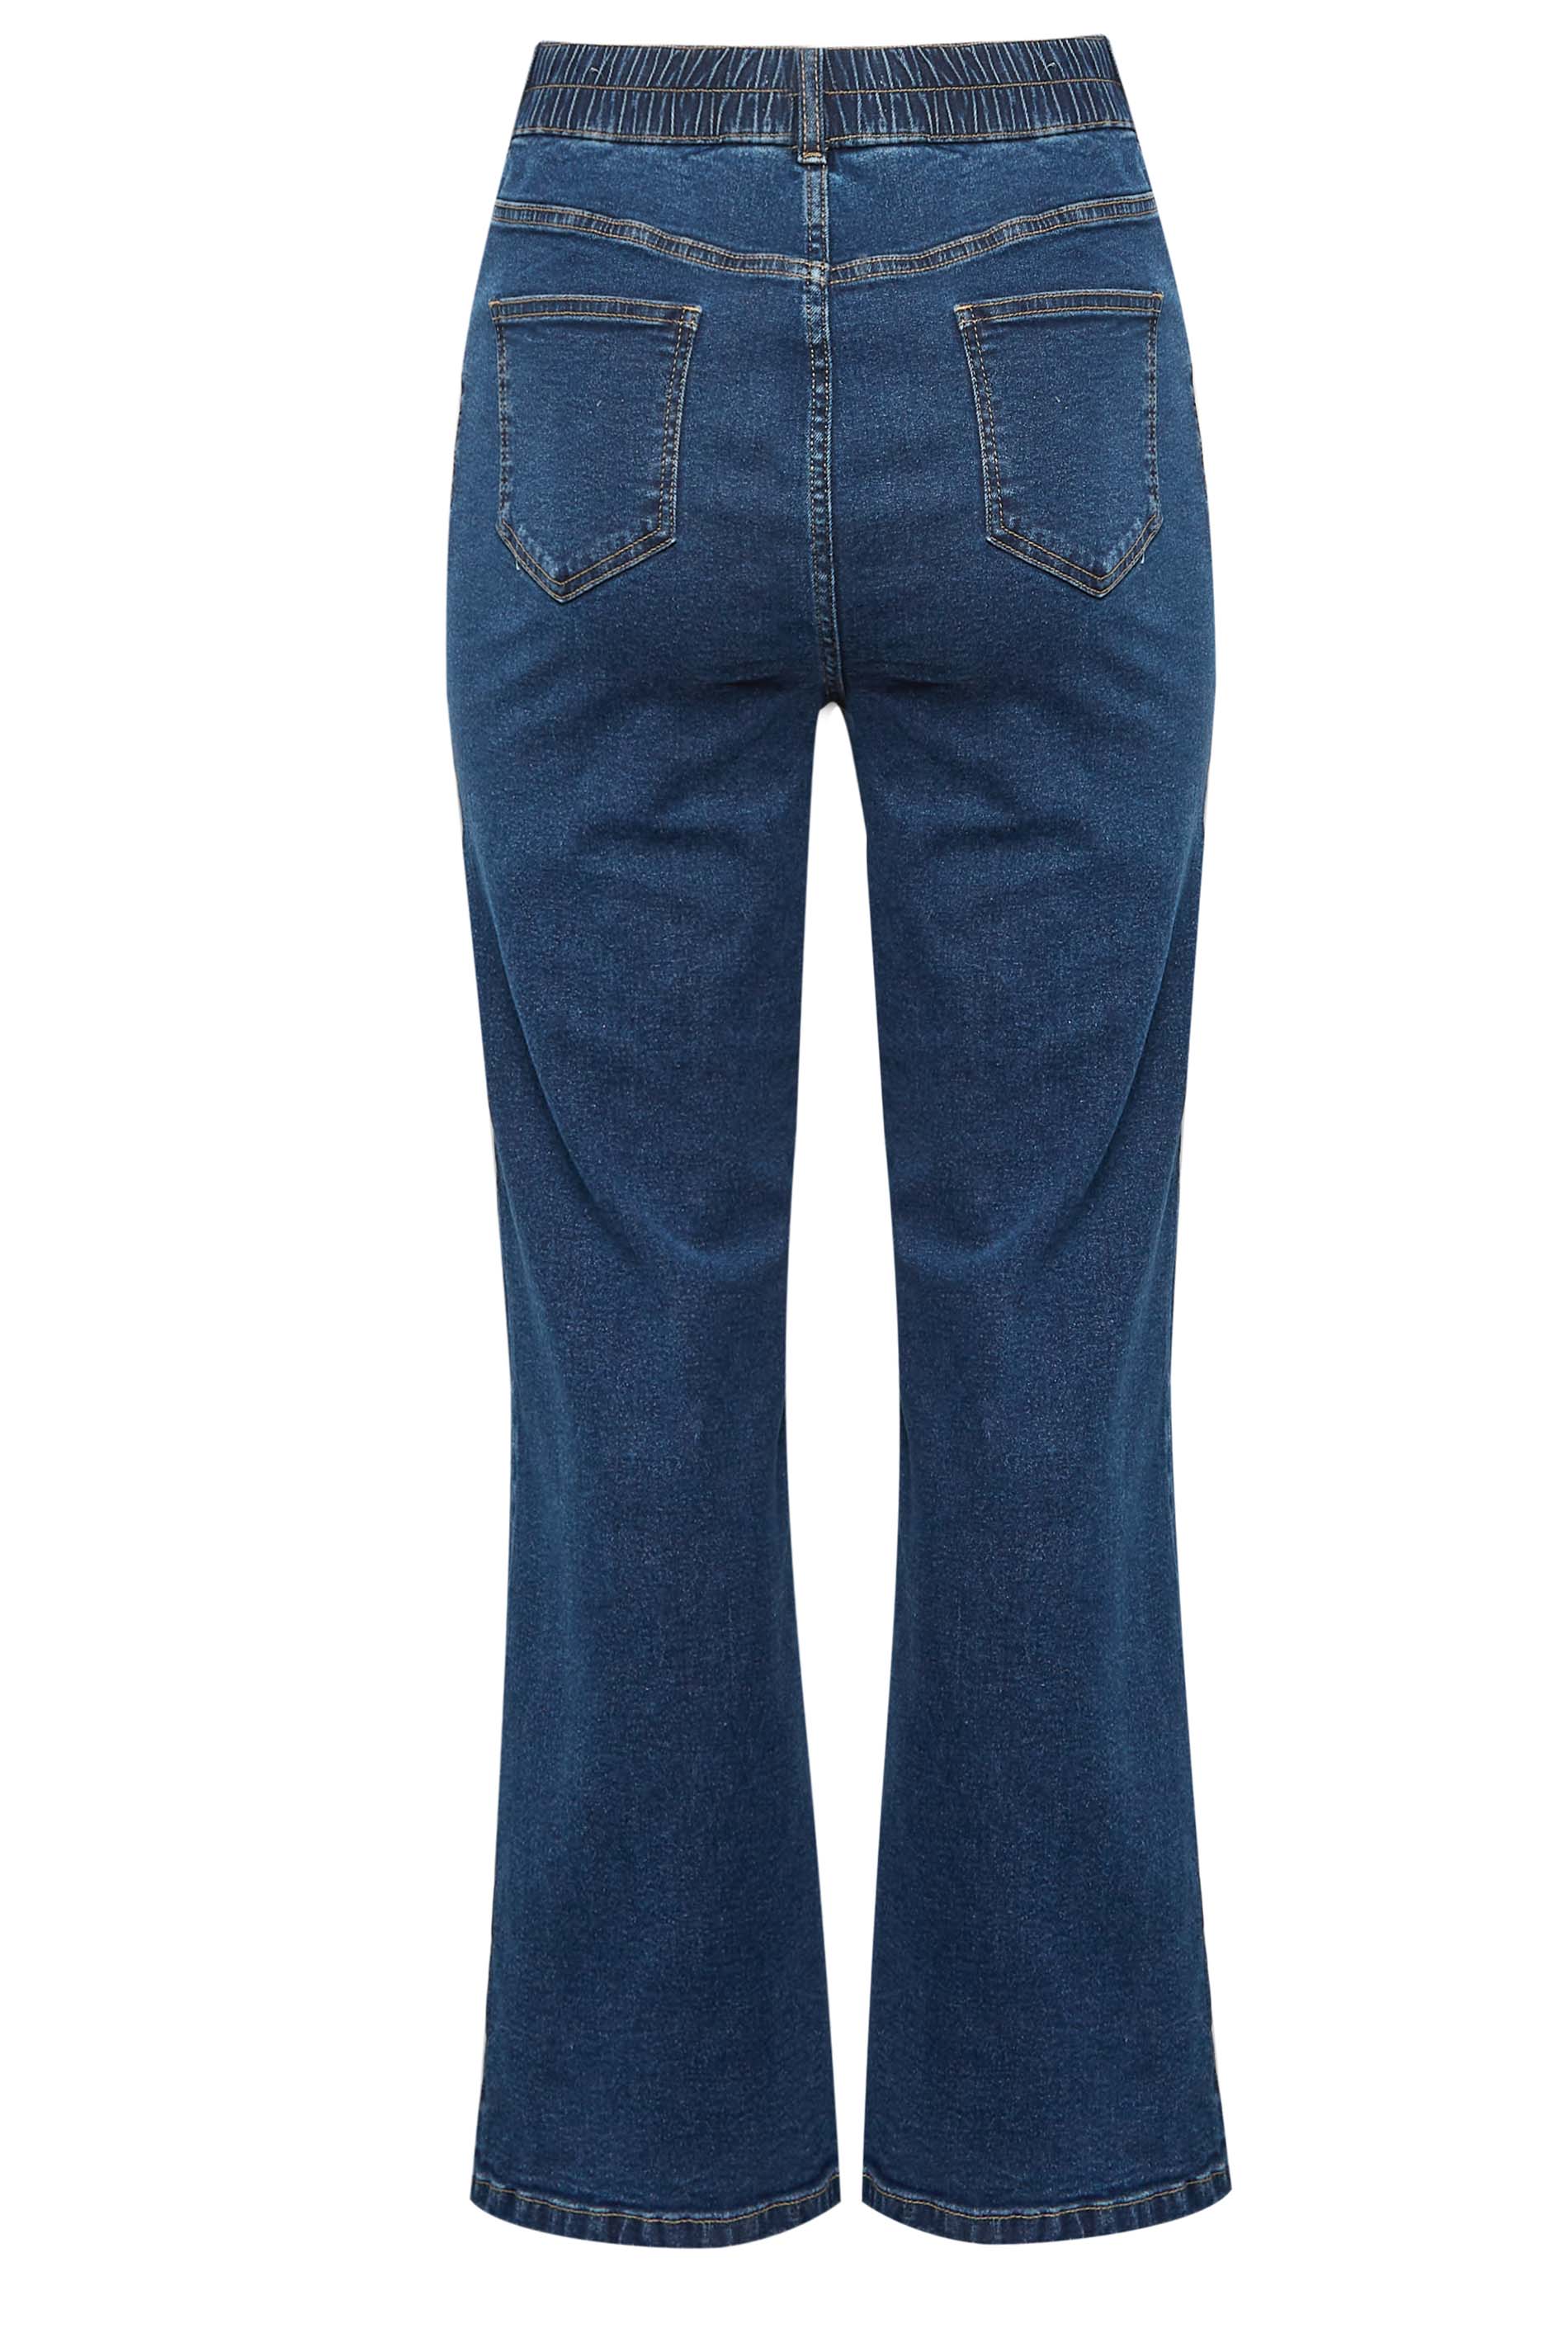 YOURS Plus Size Blue Elasticated Waist Stretch Wide Leg Jeans